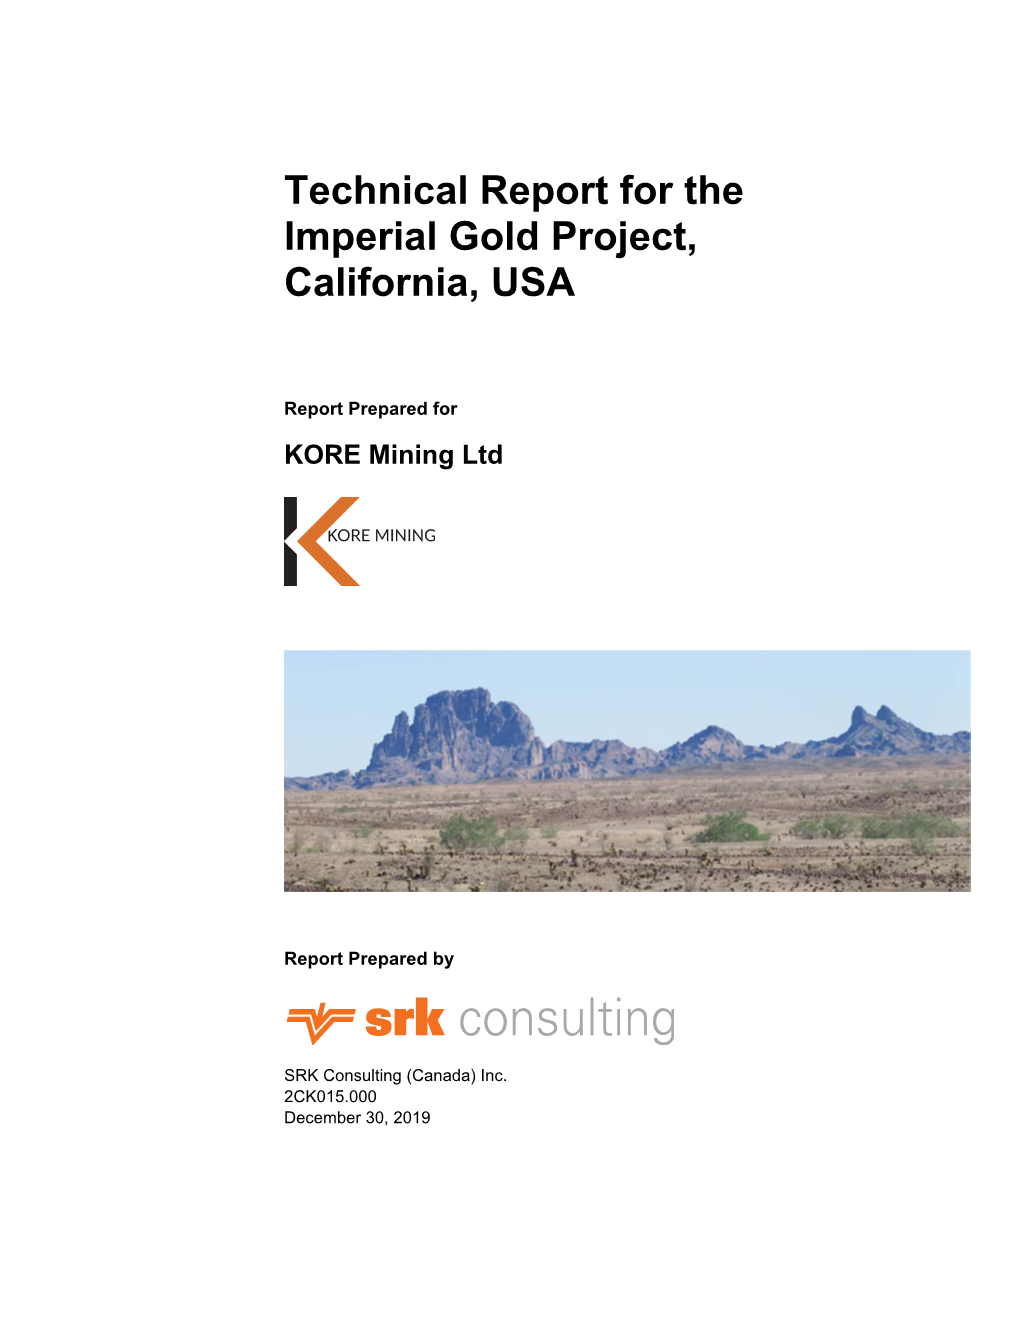 Technical Report for the Imperial Gold Project, California, USA